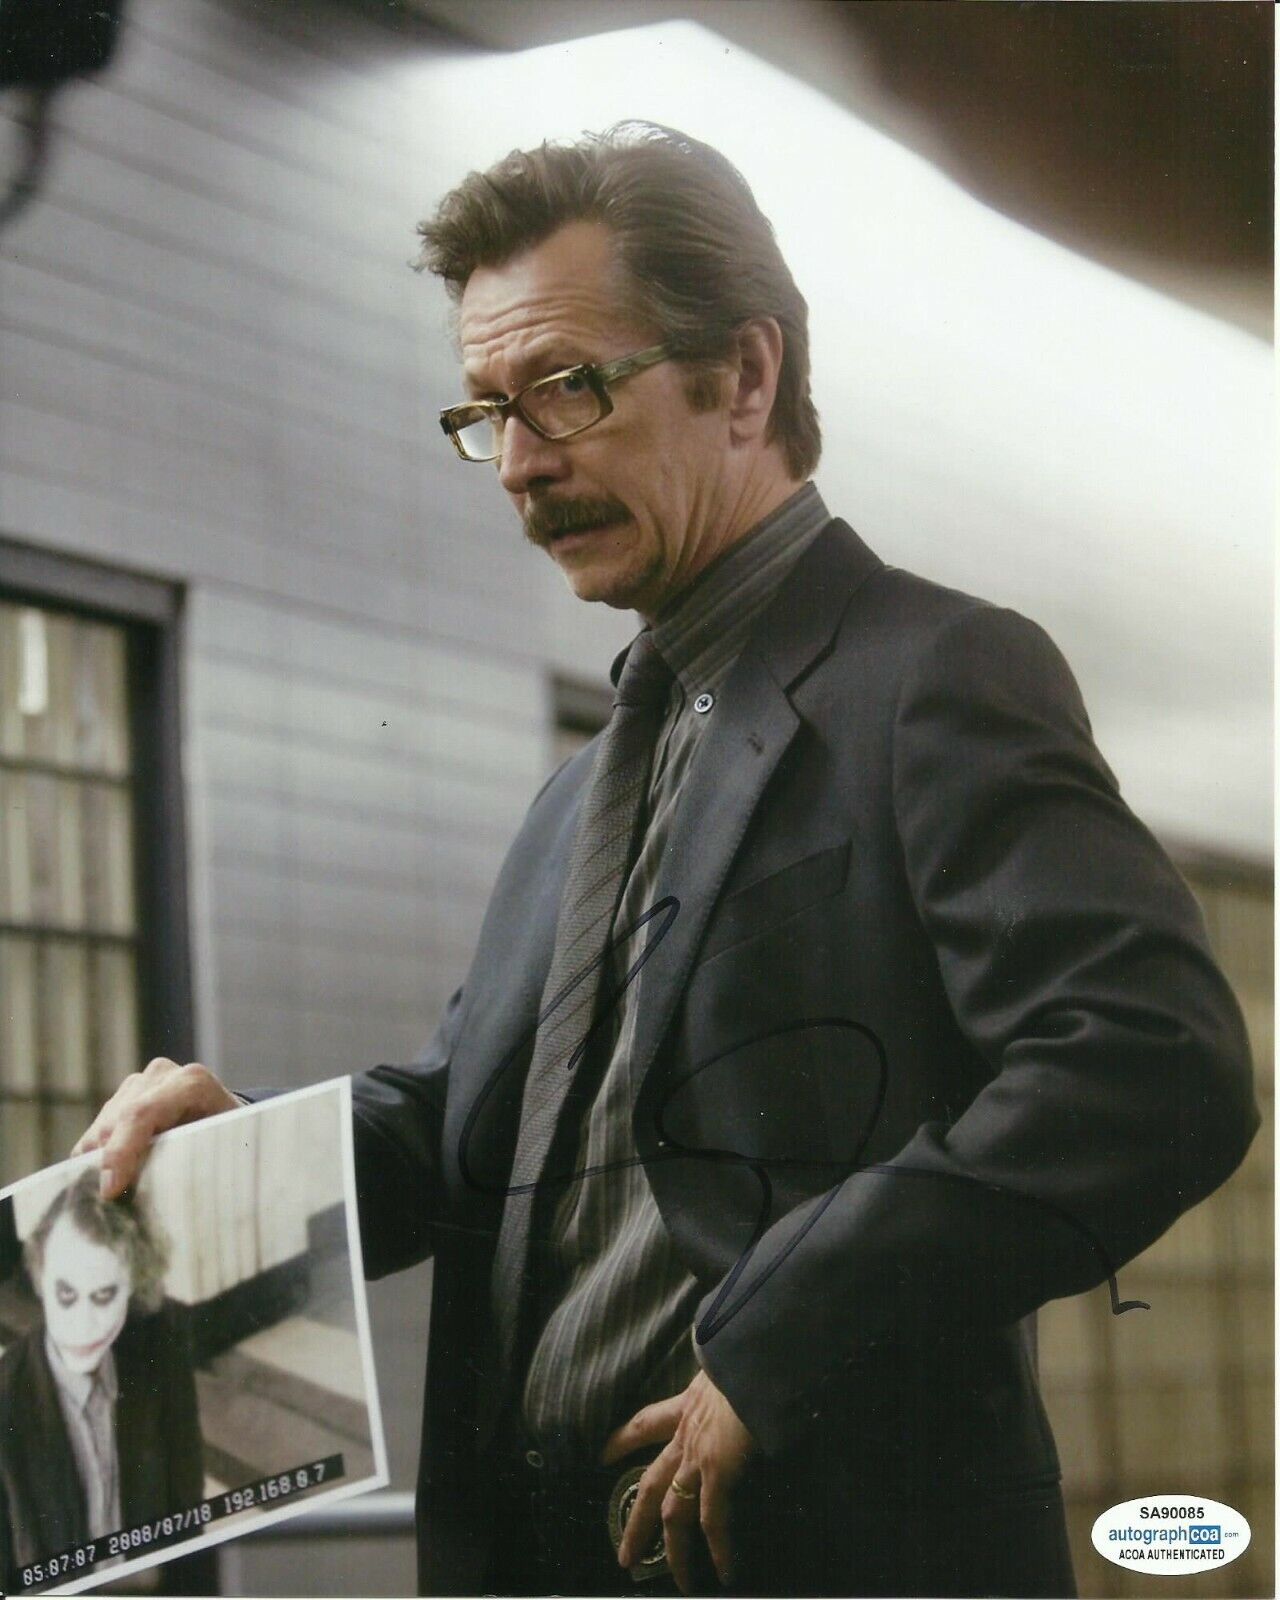 GARY OLDMAN SIGNED THE DARK KNIGHT Photo Poster painting UACC REG 242 (2) ALSO ACOA CERTIFIED